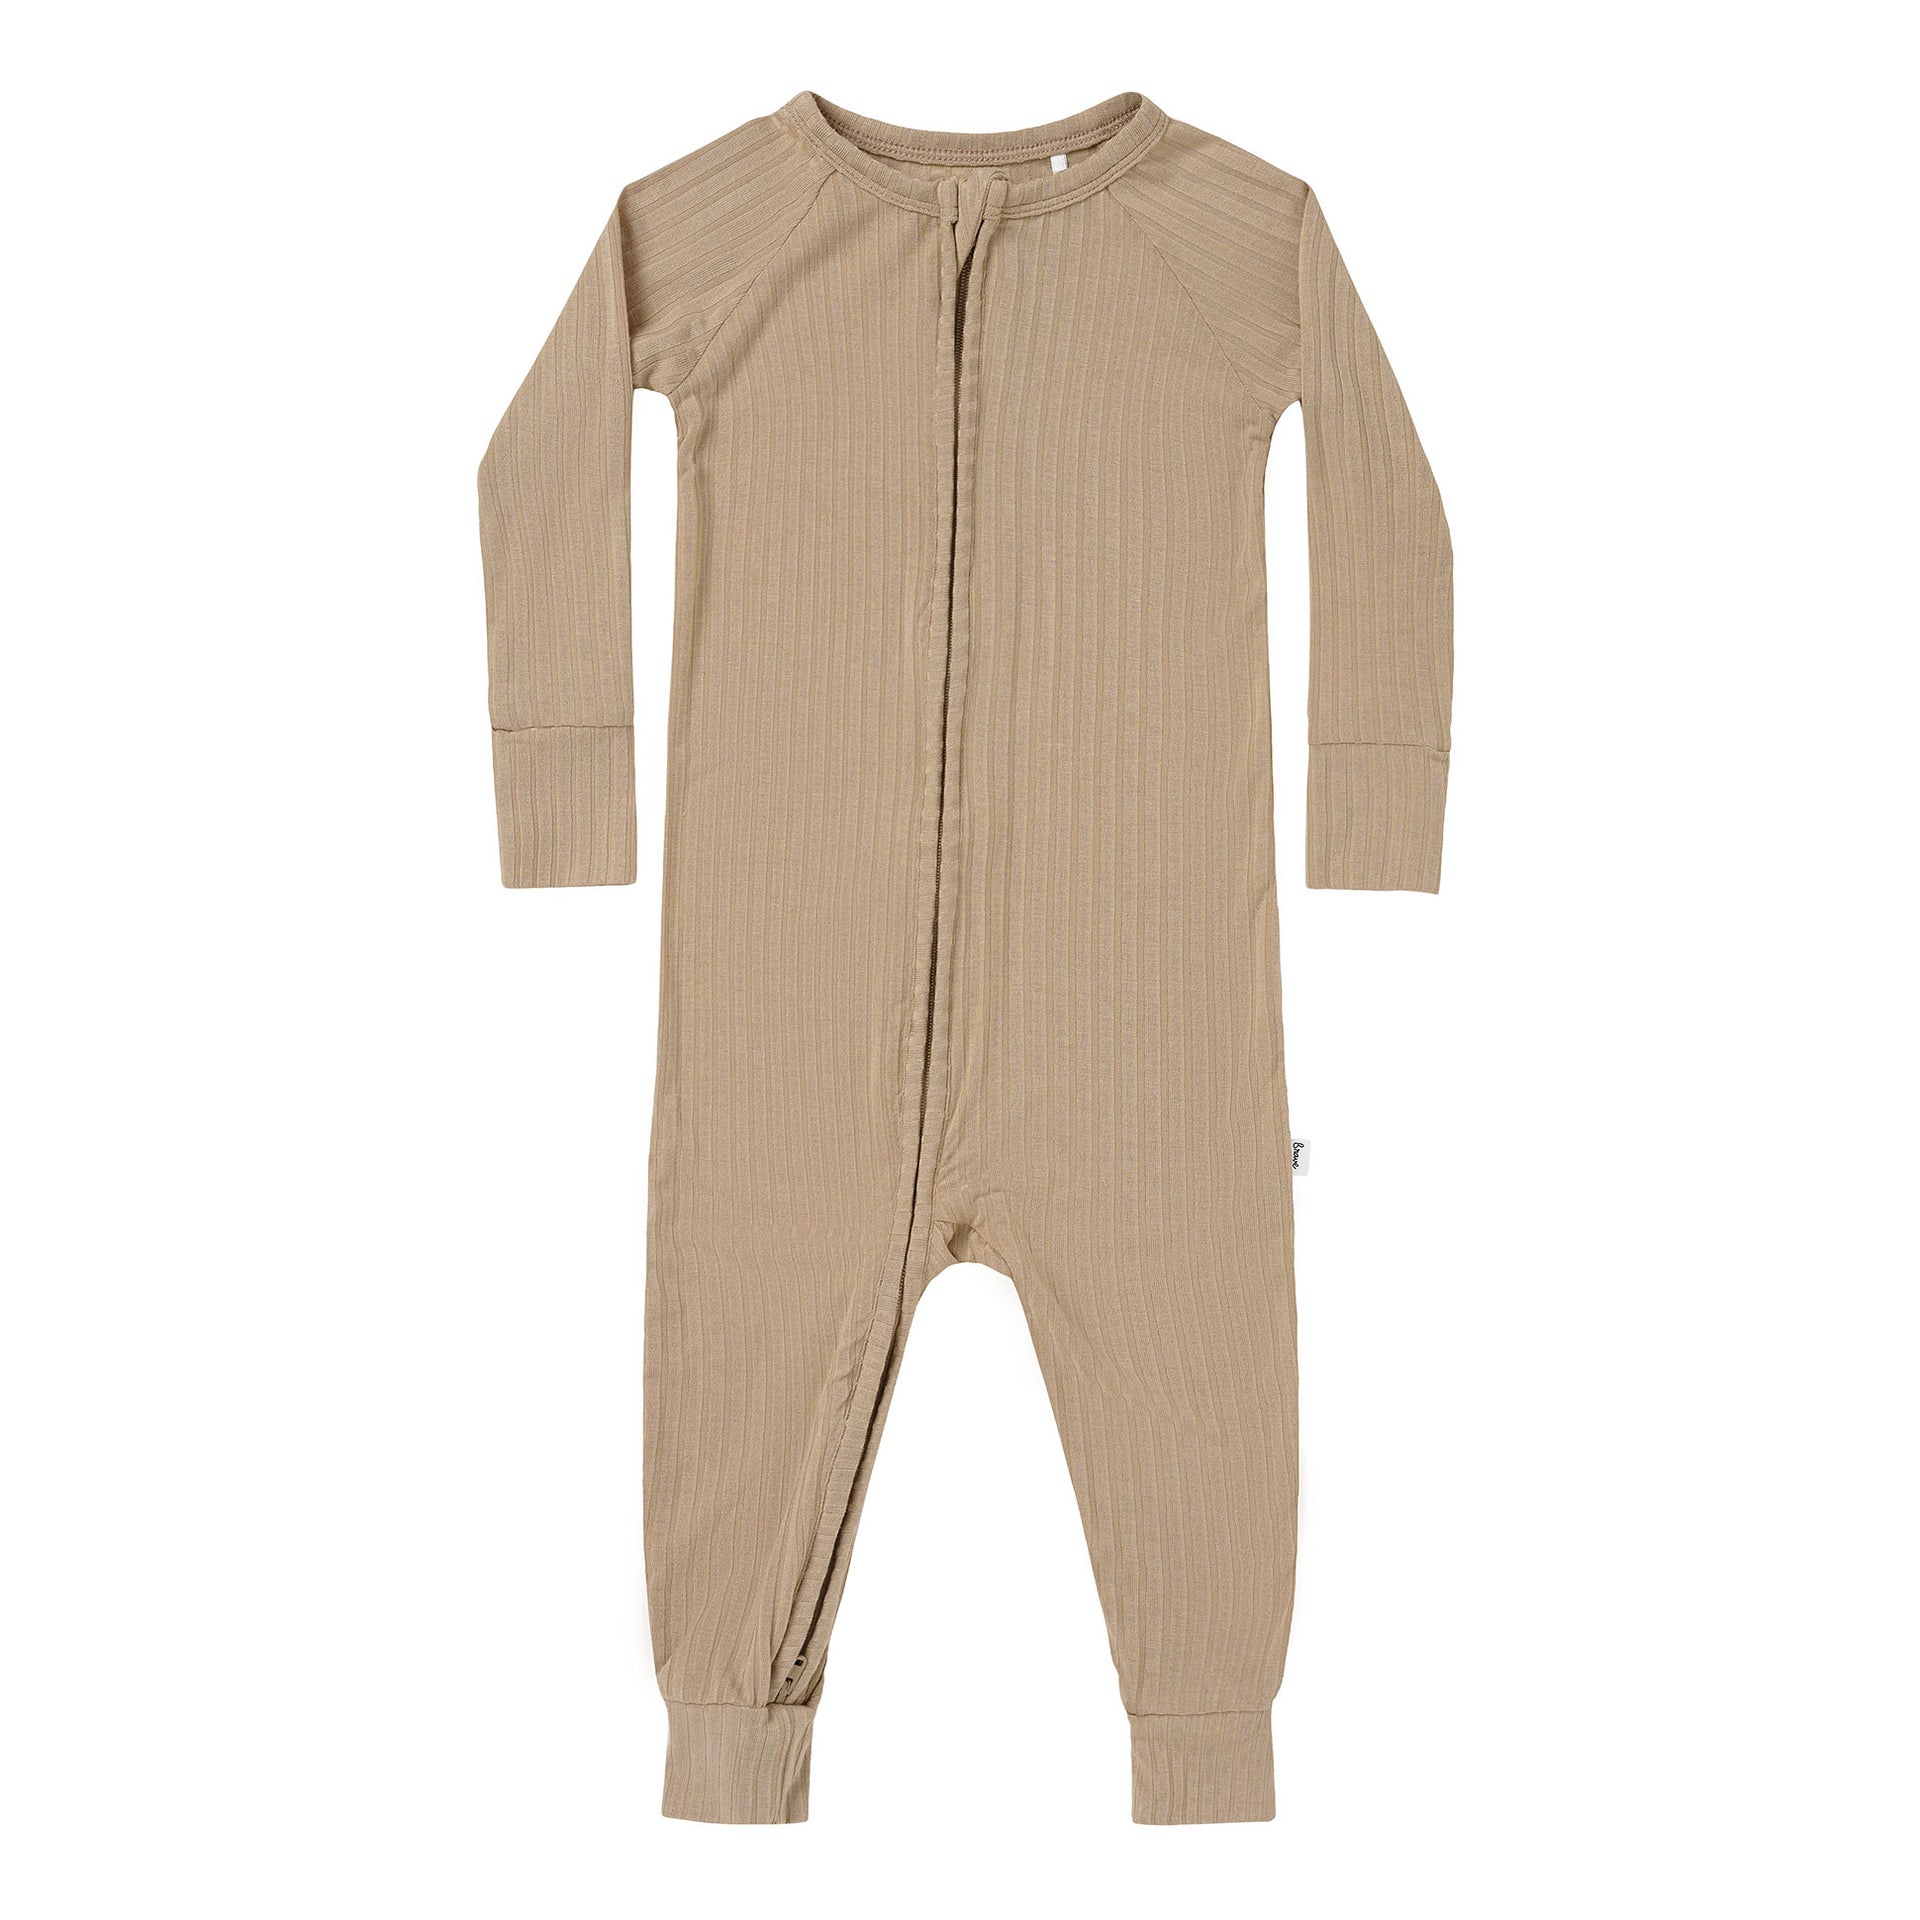 Thread & Supply Rib Pocket Romper (Extended Sizes Available) at Dry Goods